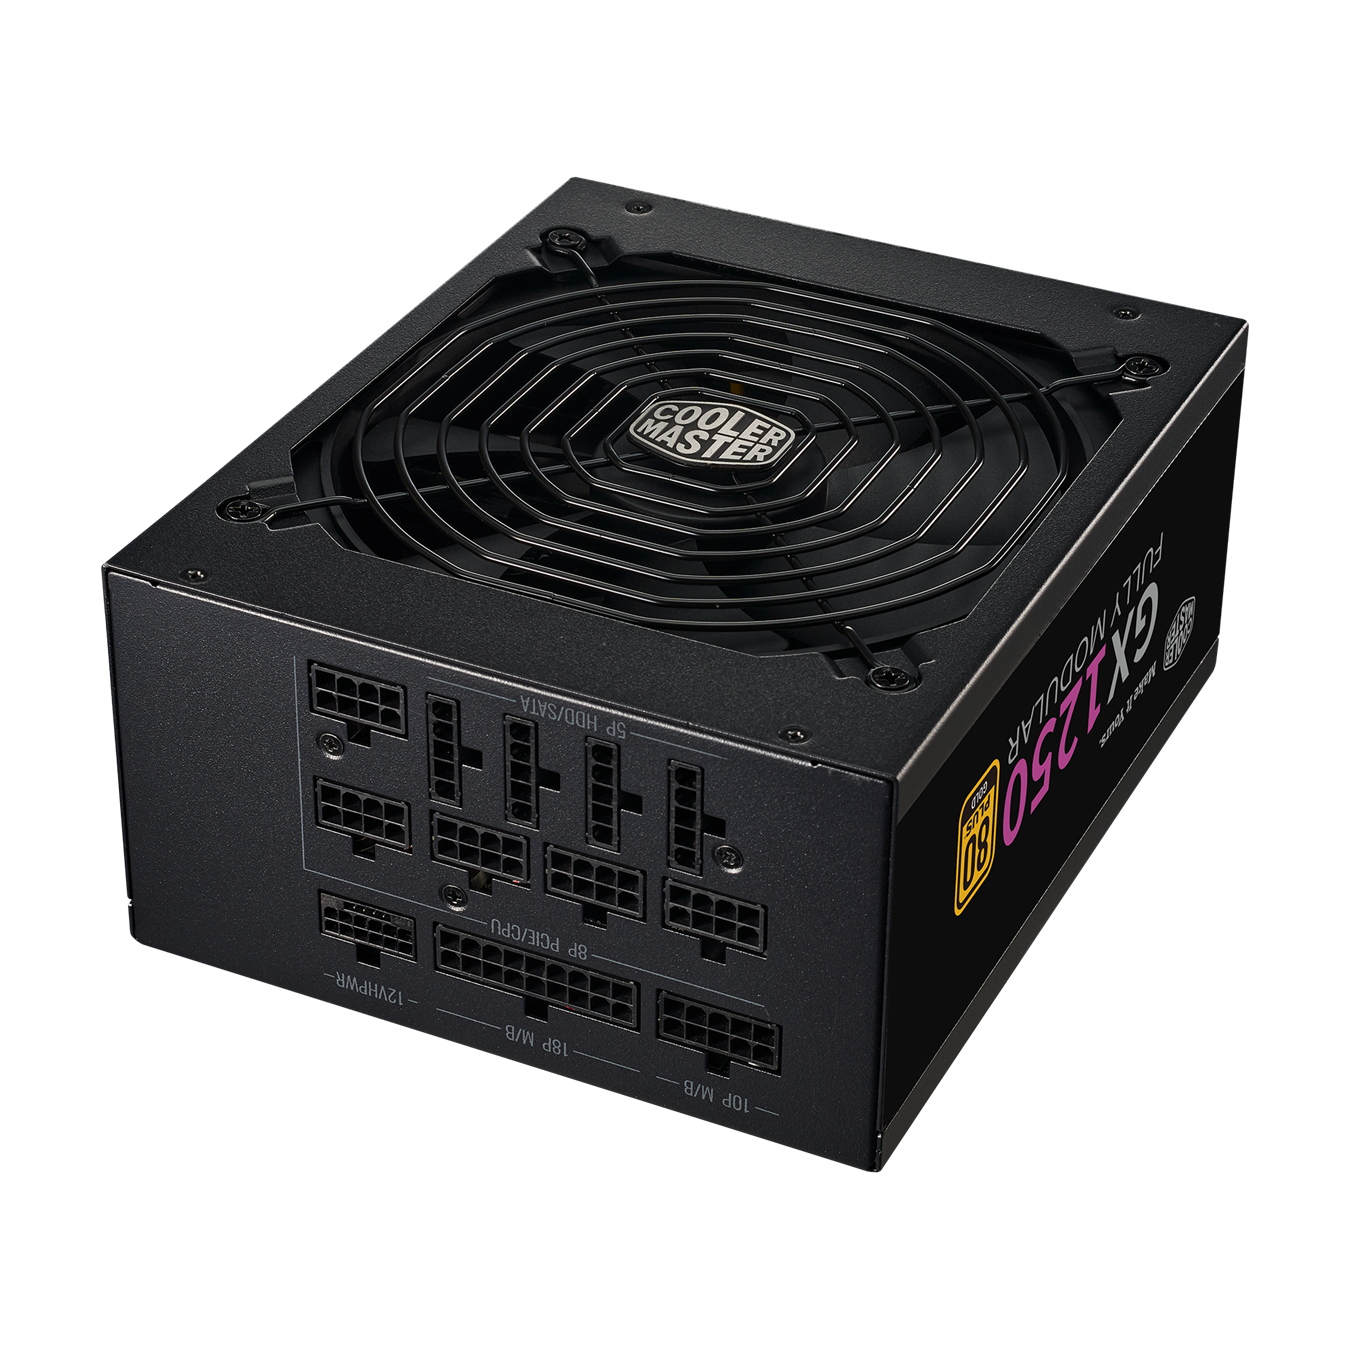 GX Gold 1250 comes with full modular flat, black cables for increased airflow.